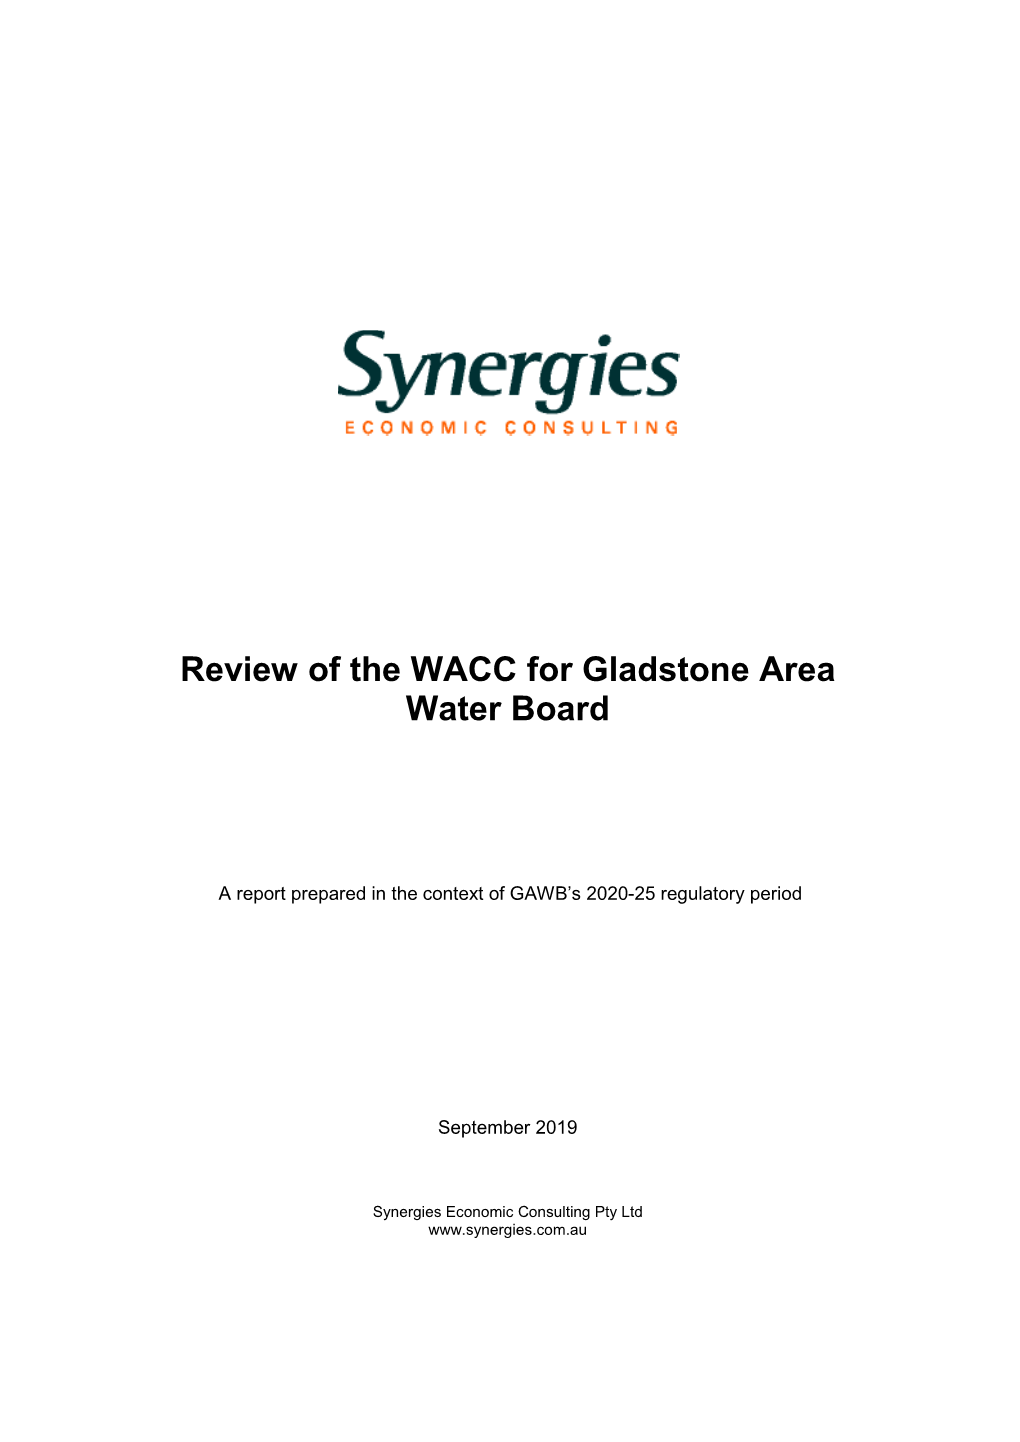 Review of the WACC for Gladstone Area Water Board